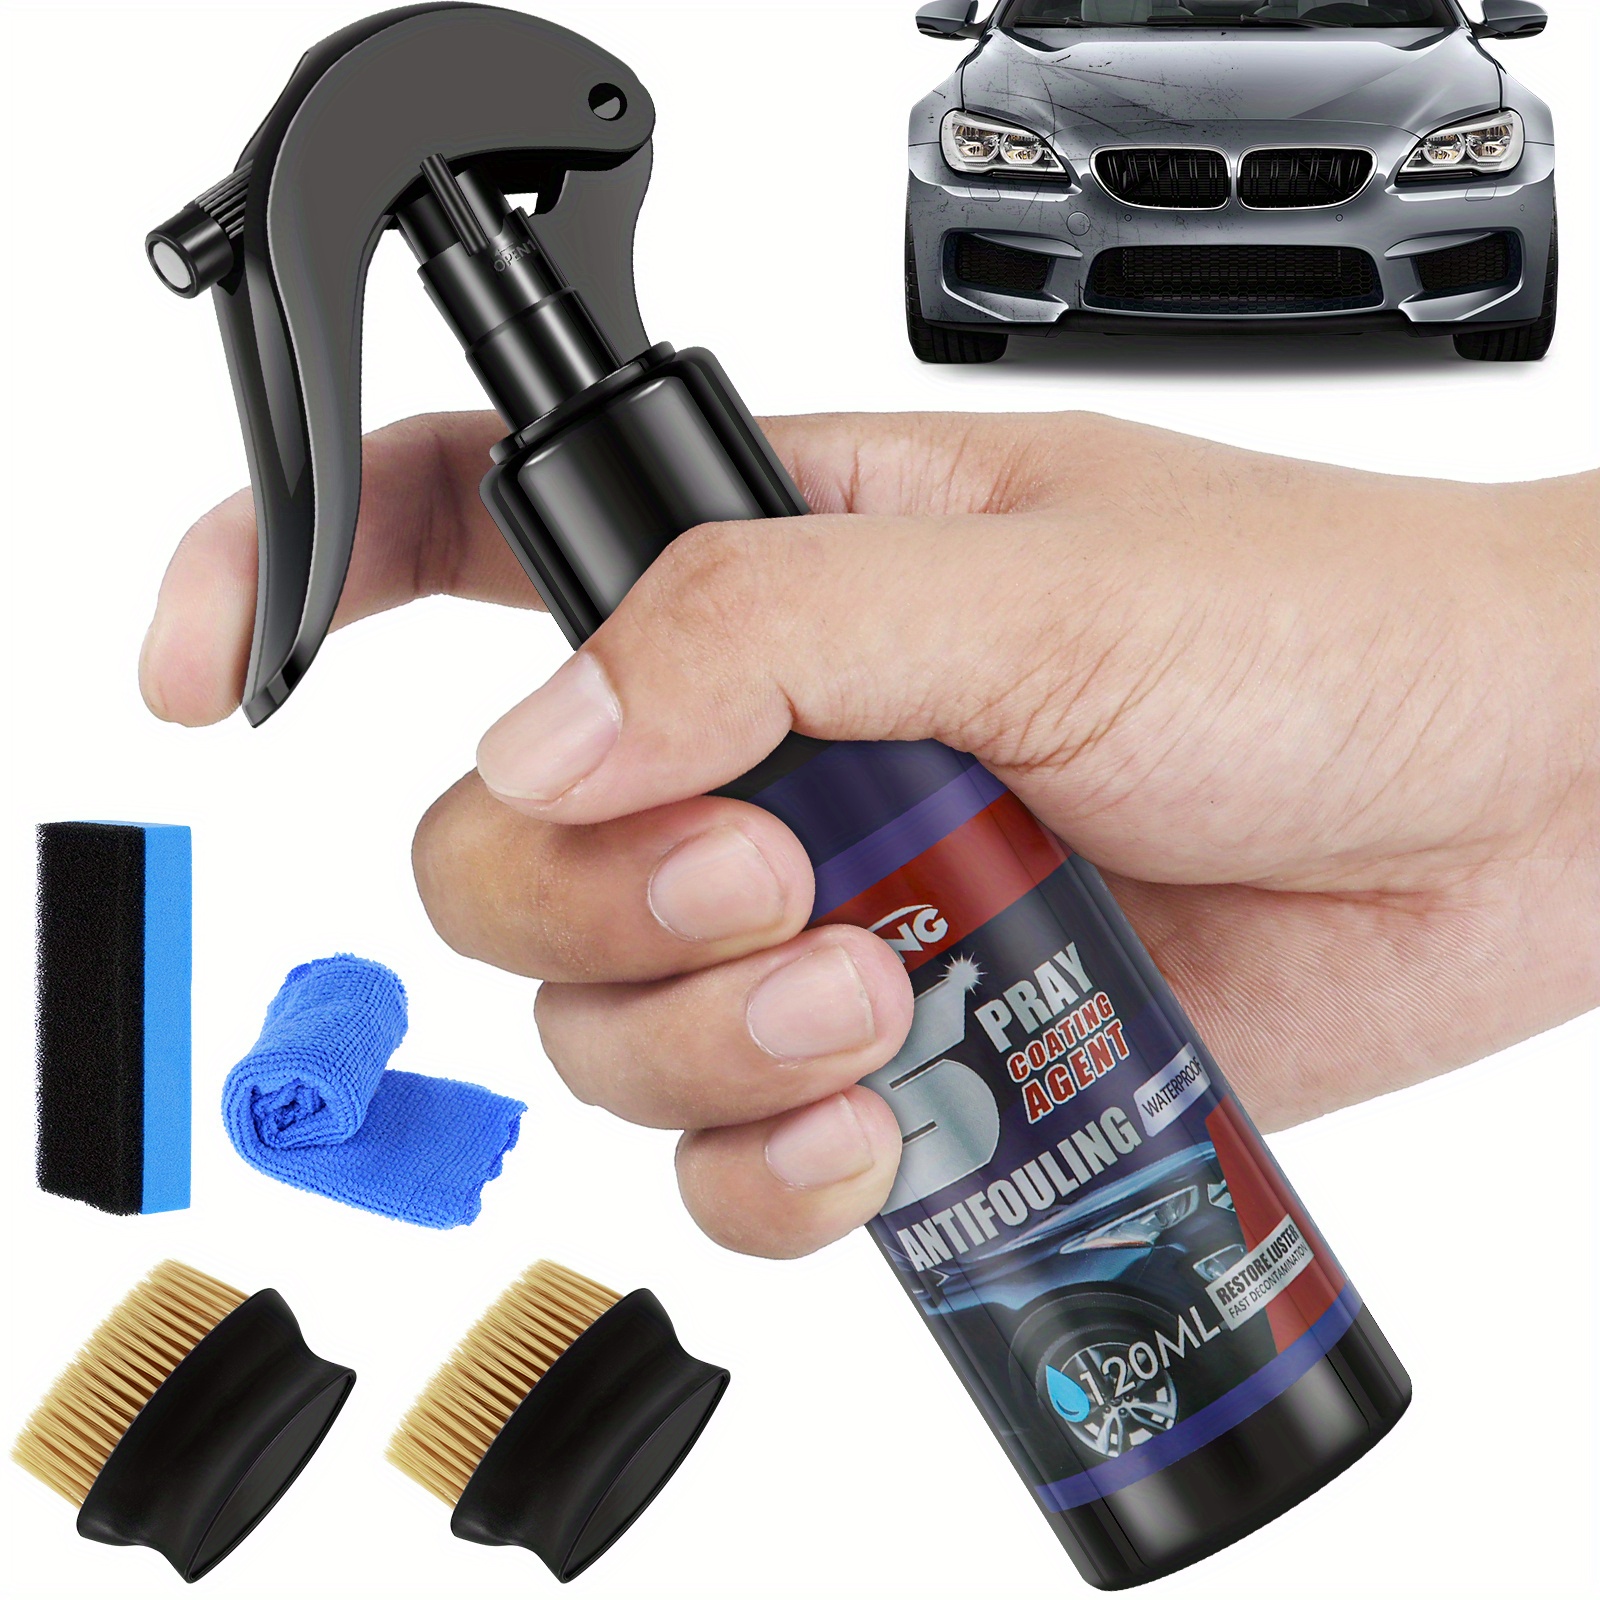 3 in 1 High Protection Fast Car Ceramic Coating Spray, Plastic